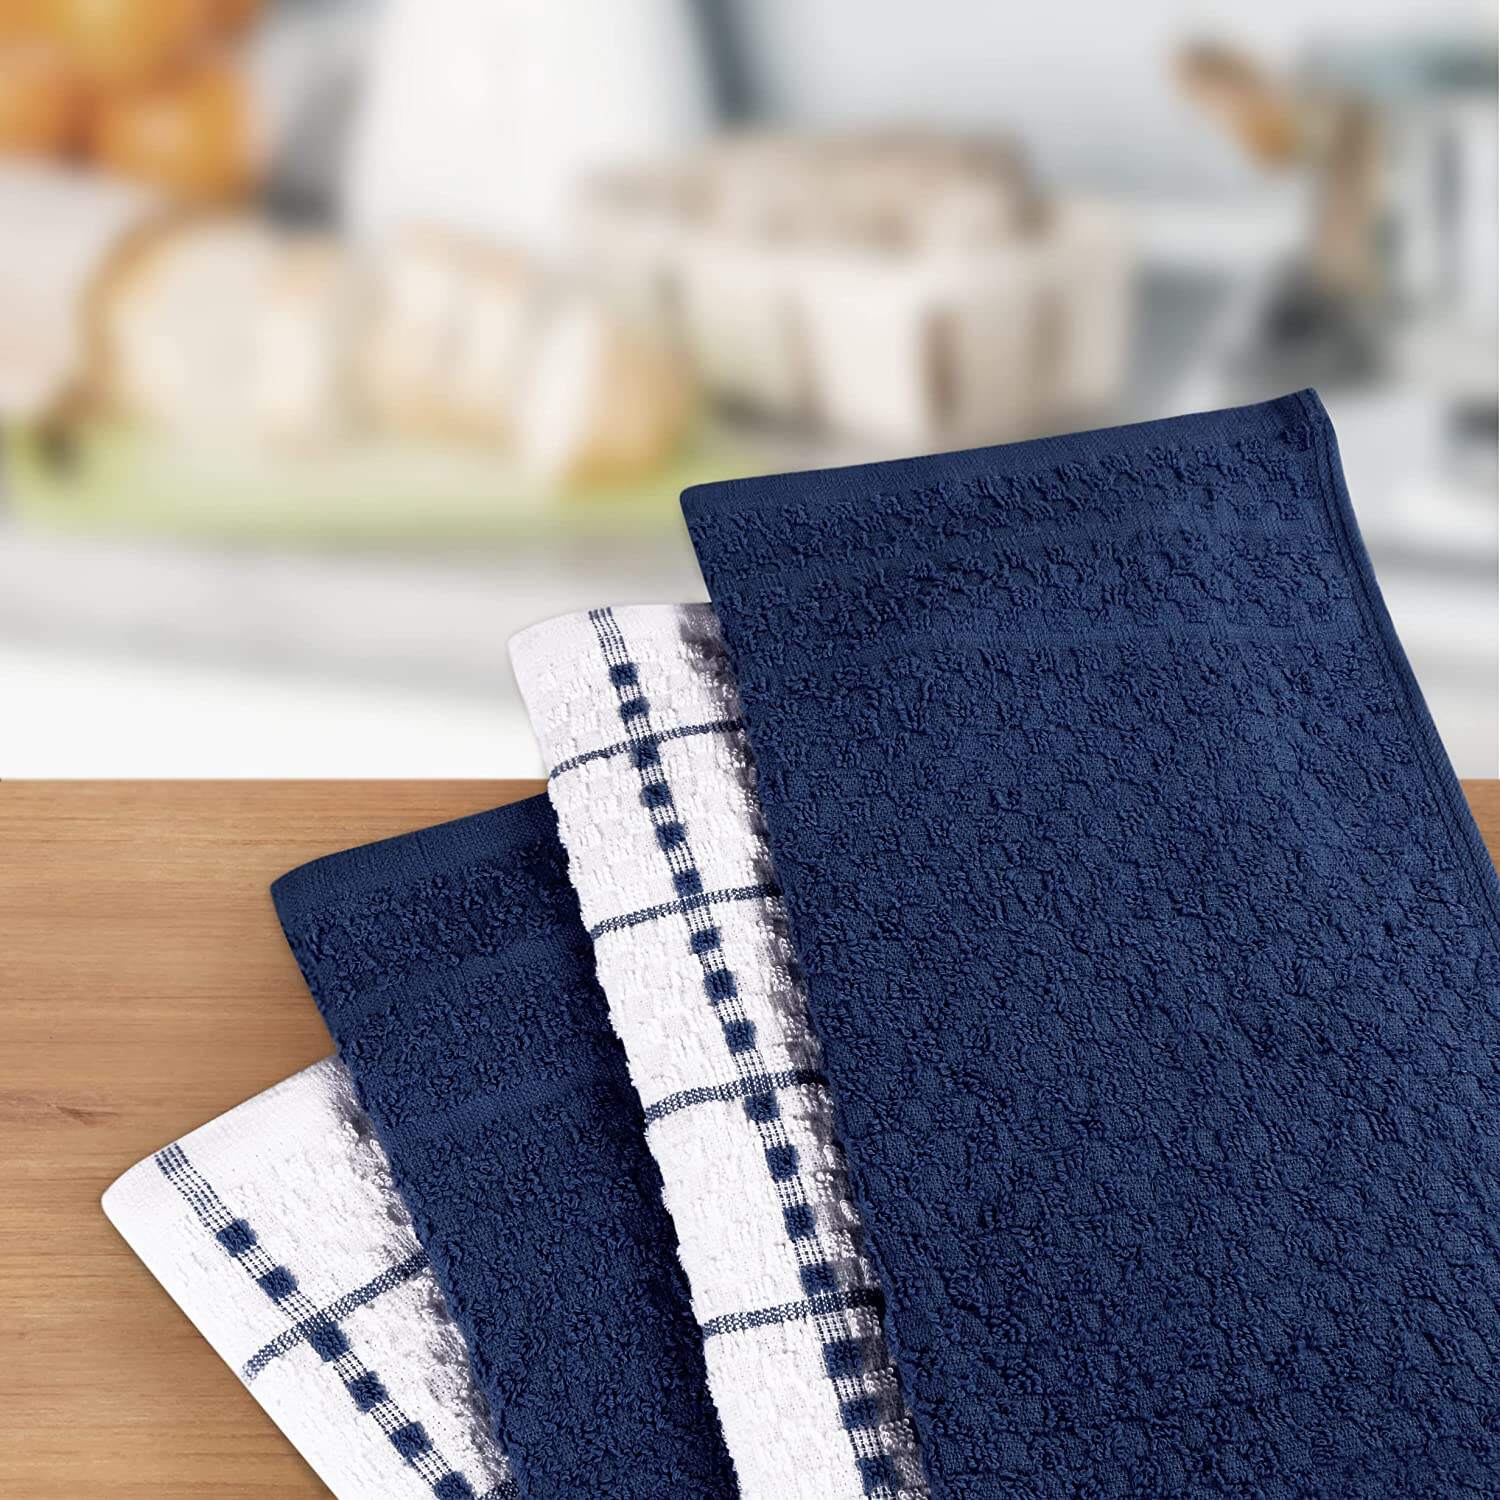 Kitchen Towels,12 Pack 15 x 25 Inches, 100% Ring Spun Cotton Super Soft